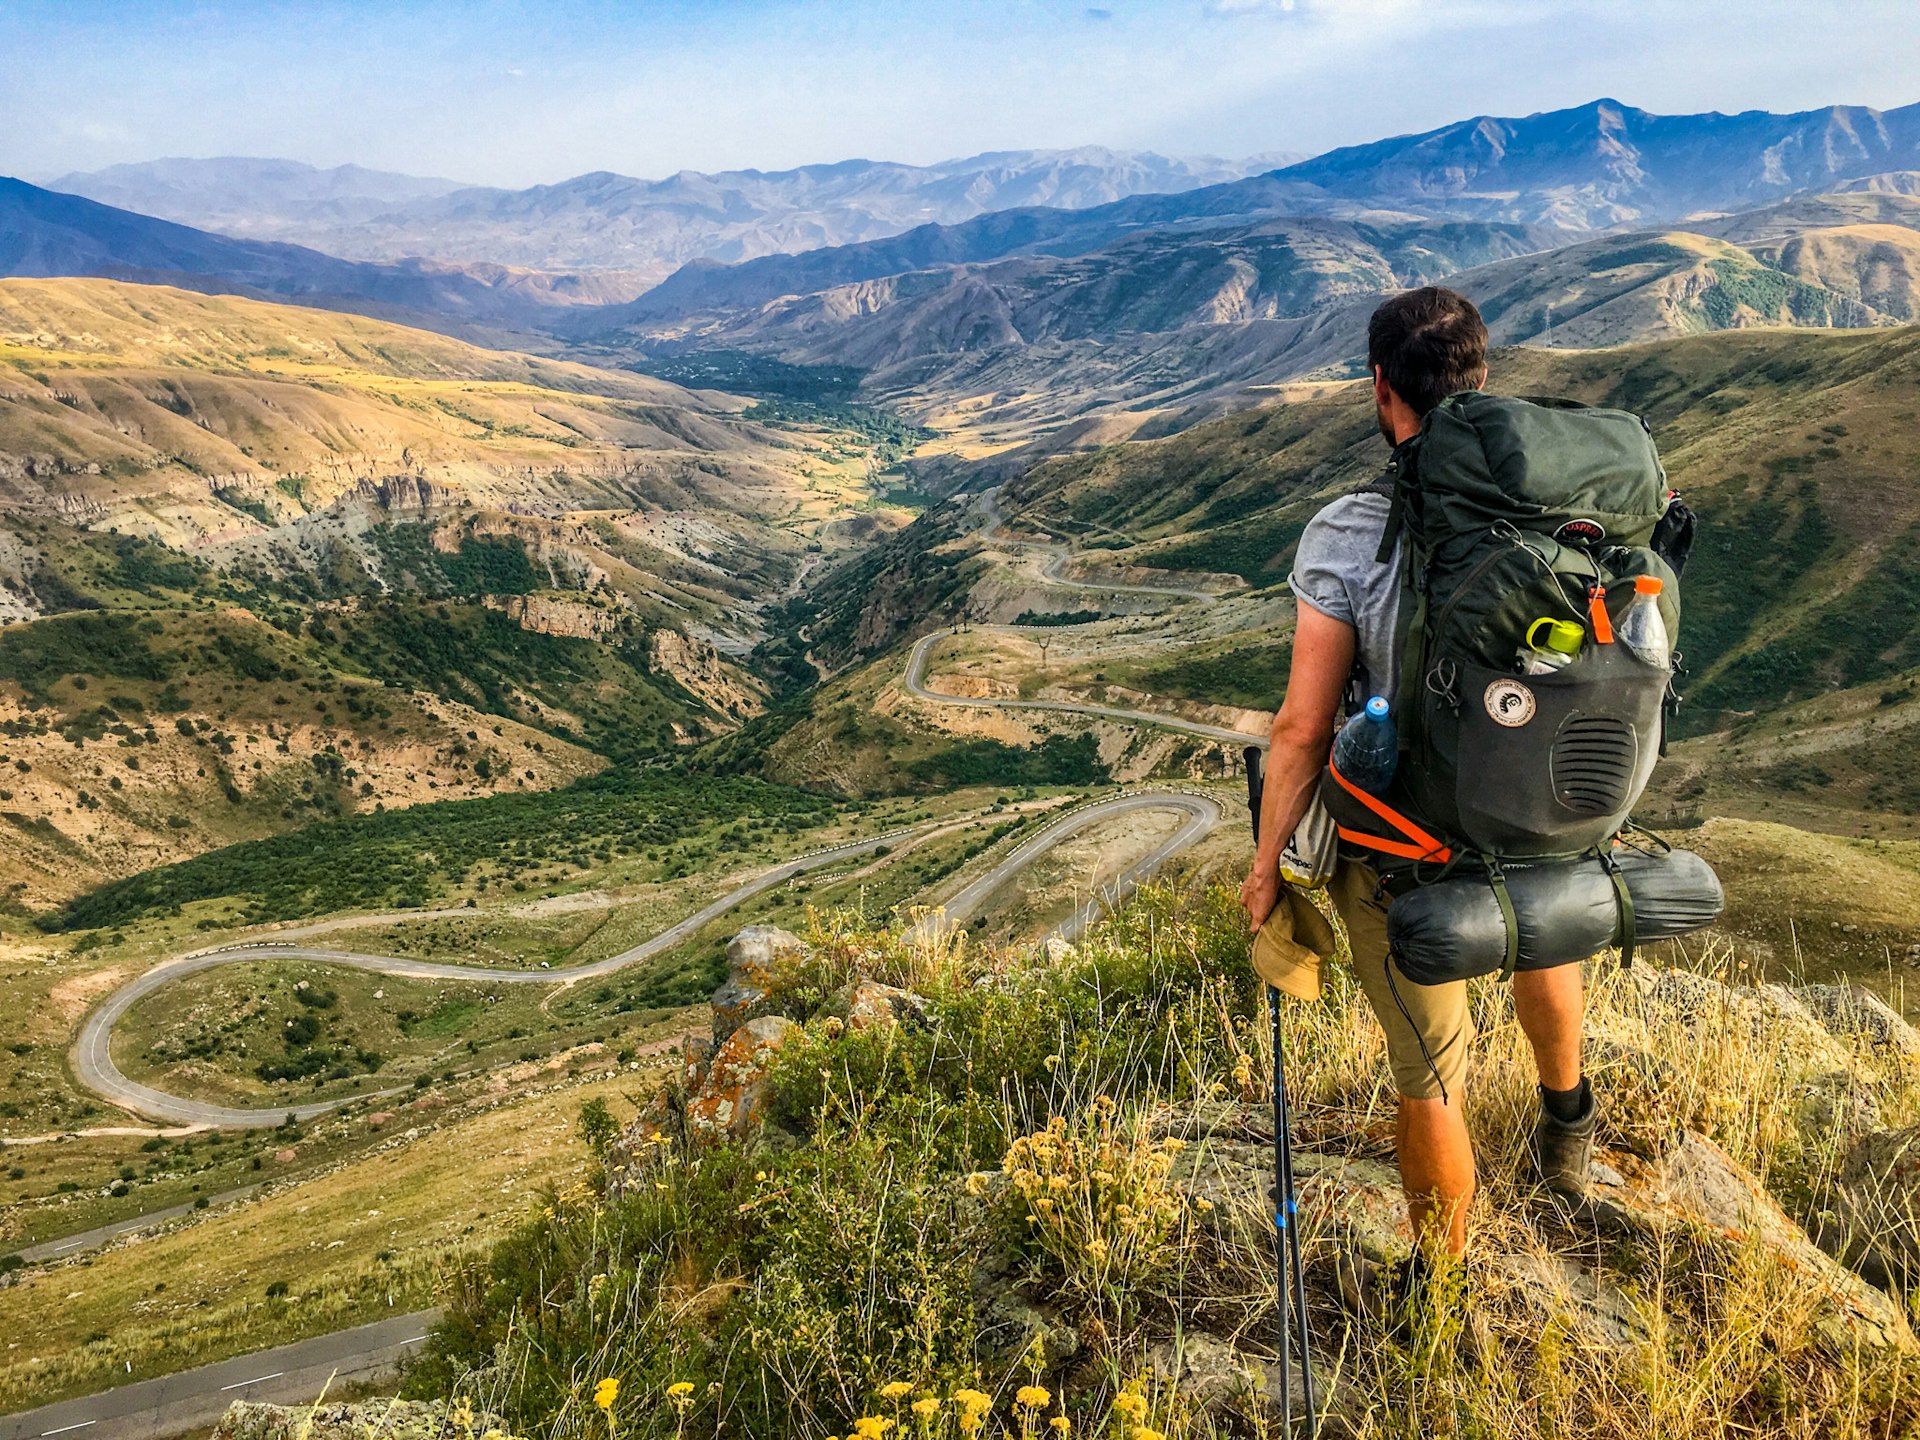 A hiker with a backpack looks out at a valley view in the mountains, Transcaucasian Trail, Armenia